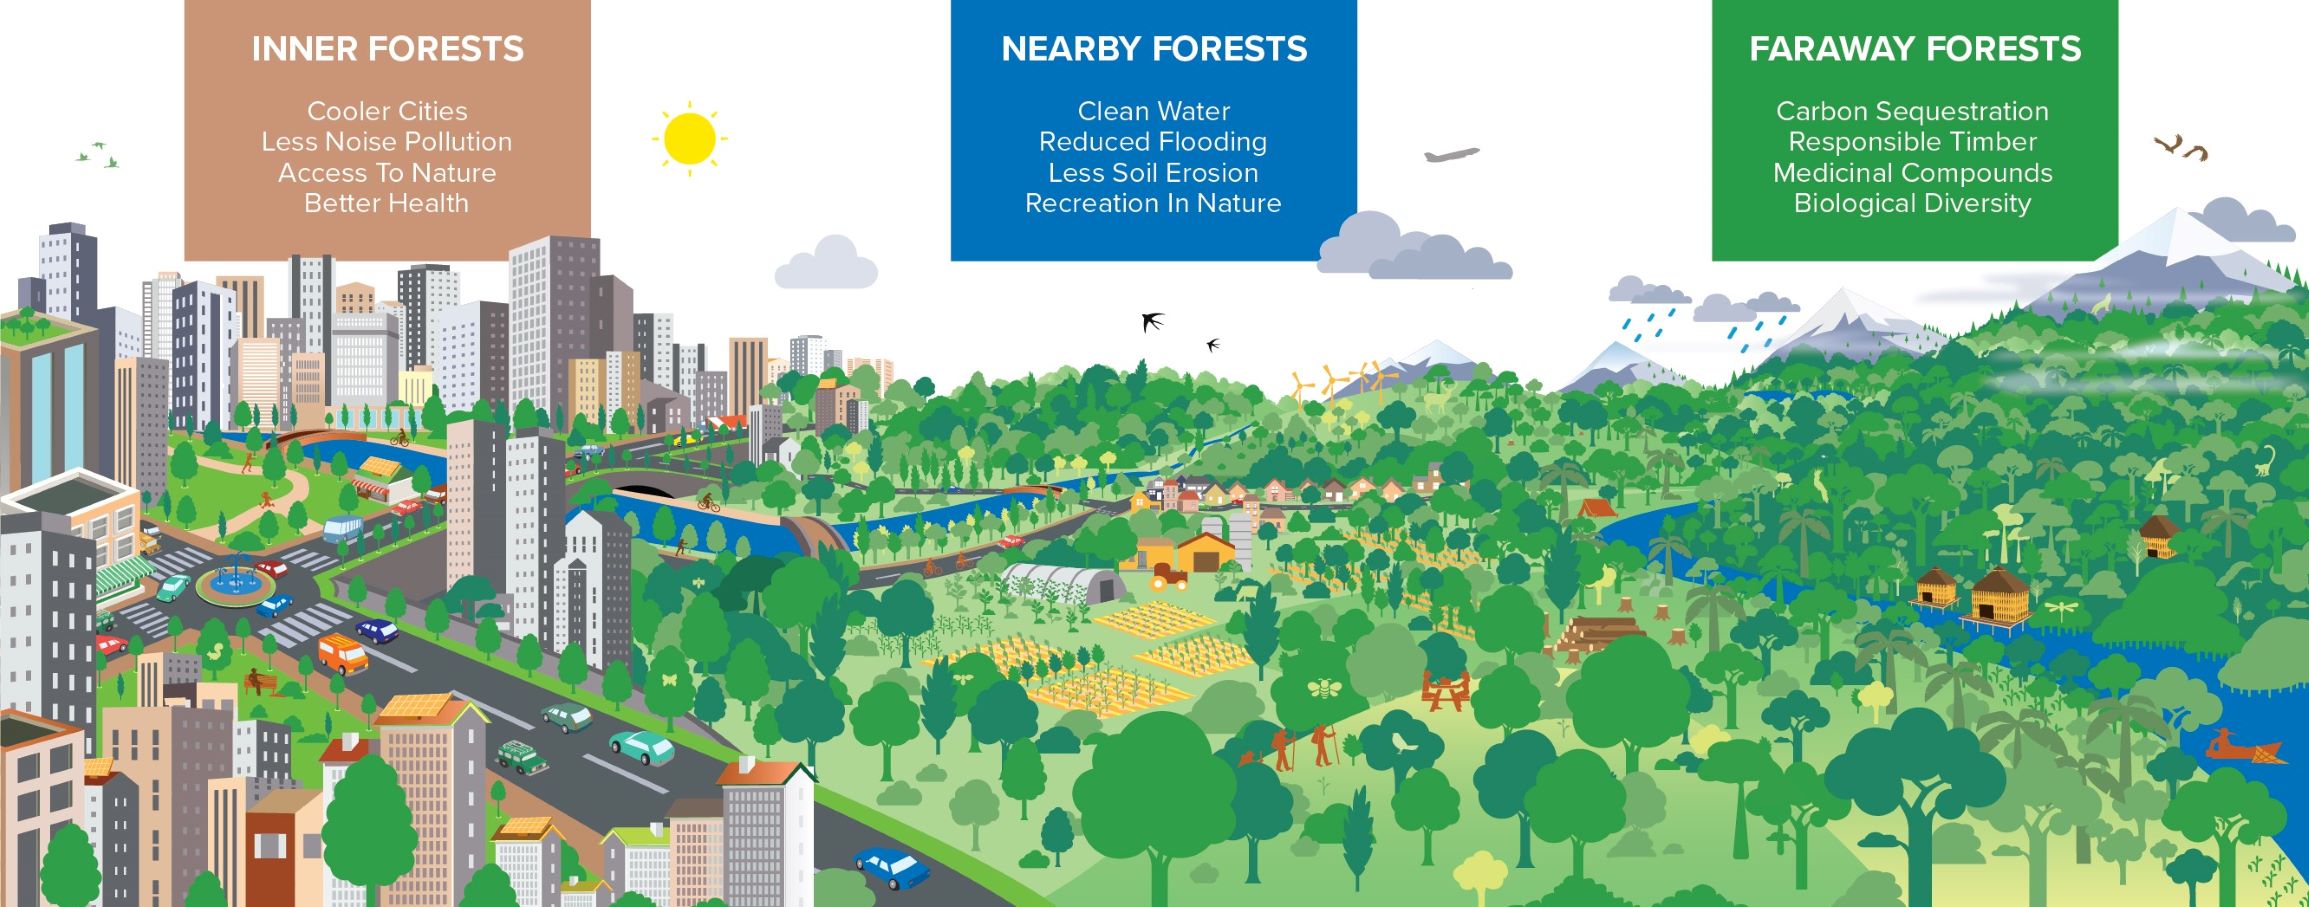 Cities4forests' three forest categories: Inner, Nearby and Faraway